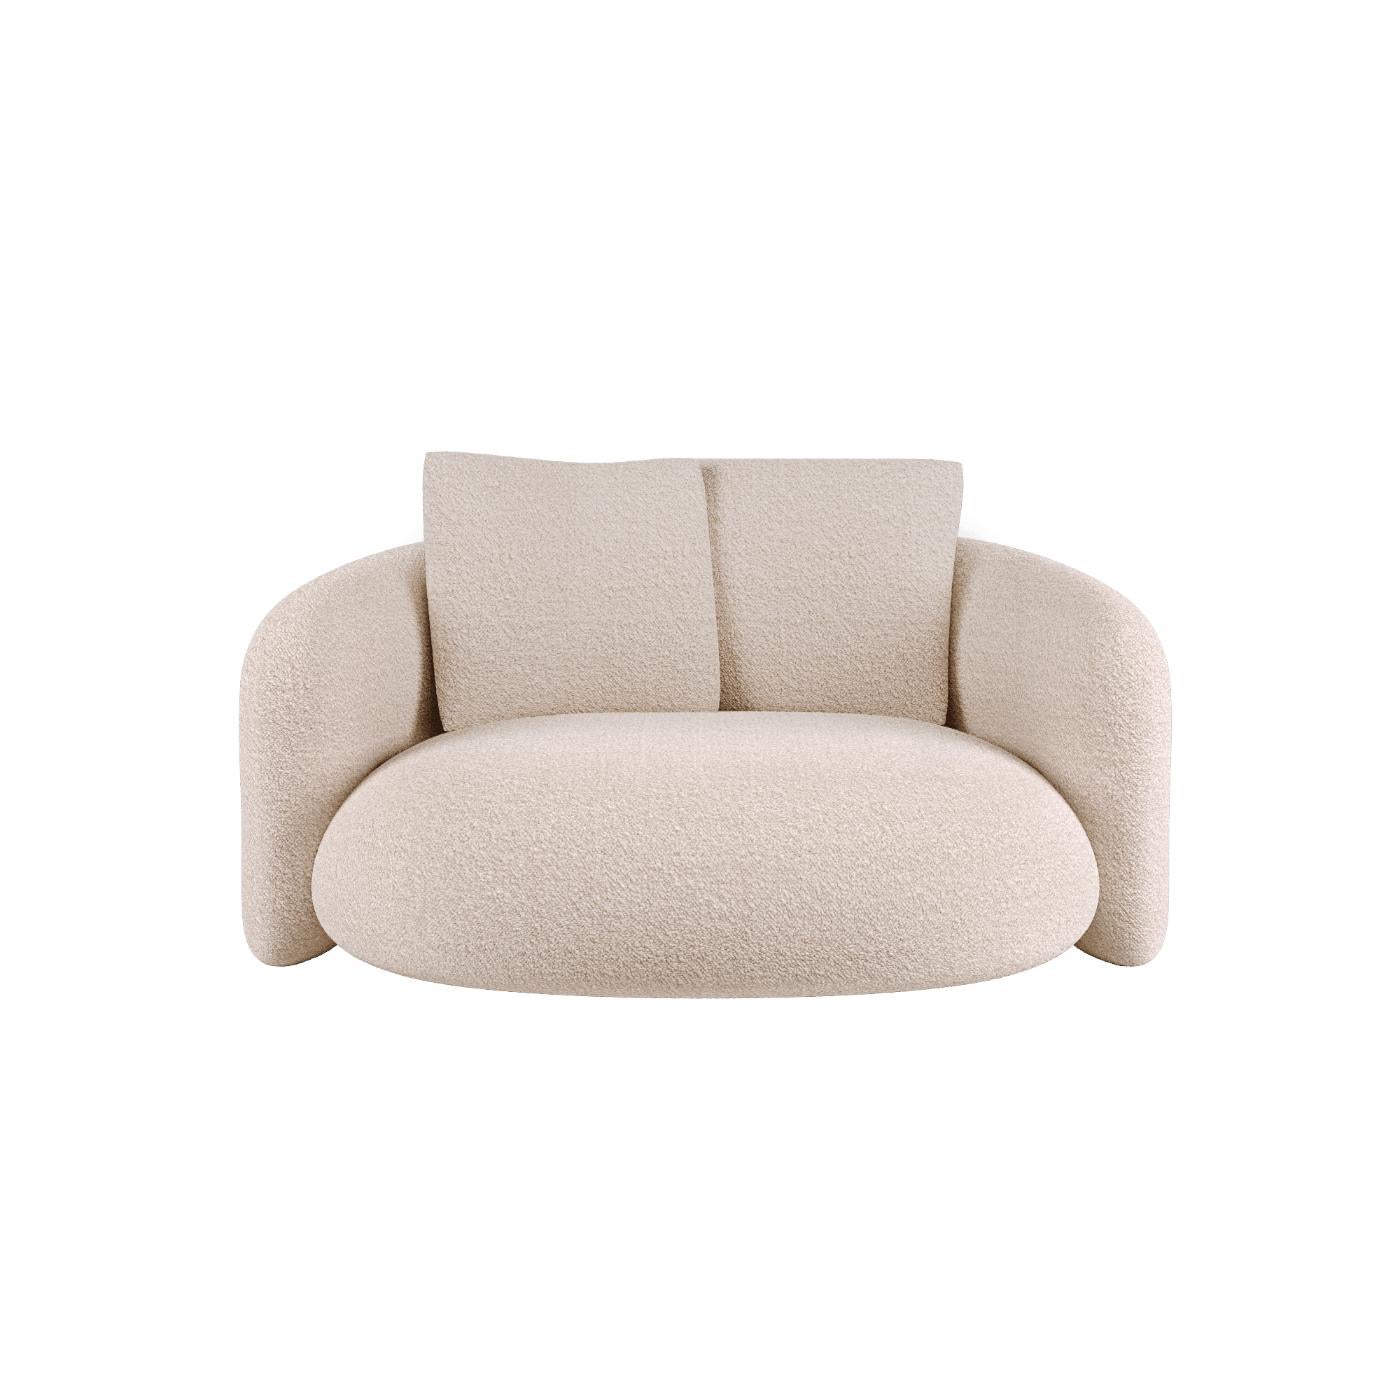 Bold Love Bed by Mohdern
Dimensions: W 170 x D 170 x H 75 cm
Materials: Fabric, Bouclé


Bold is a refined furniture collection designed and produced by the Mohdern brand. The series includes the armchair and lounge chair; the sofa in different